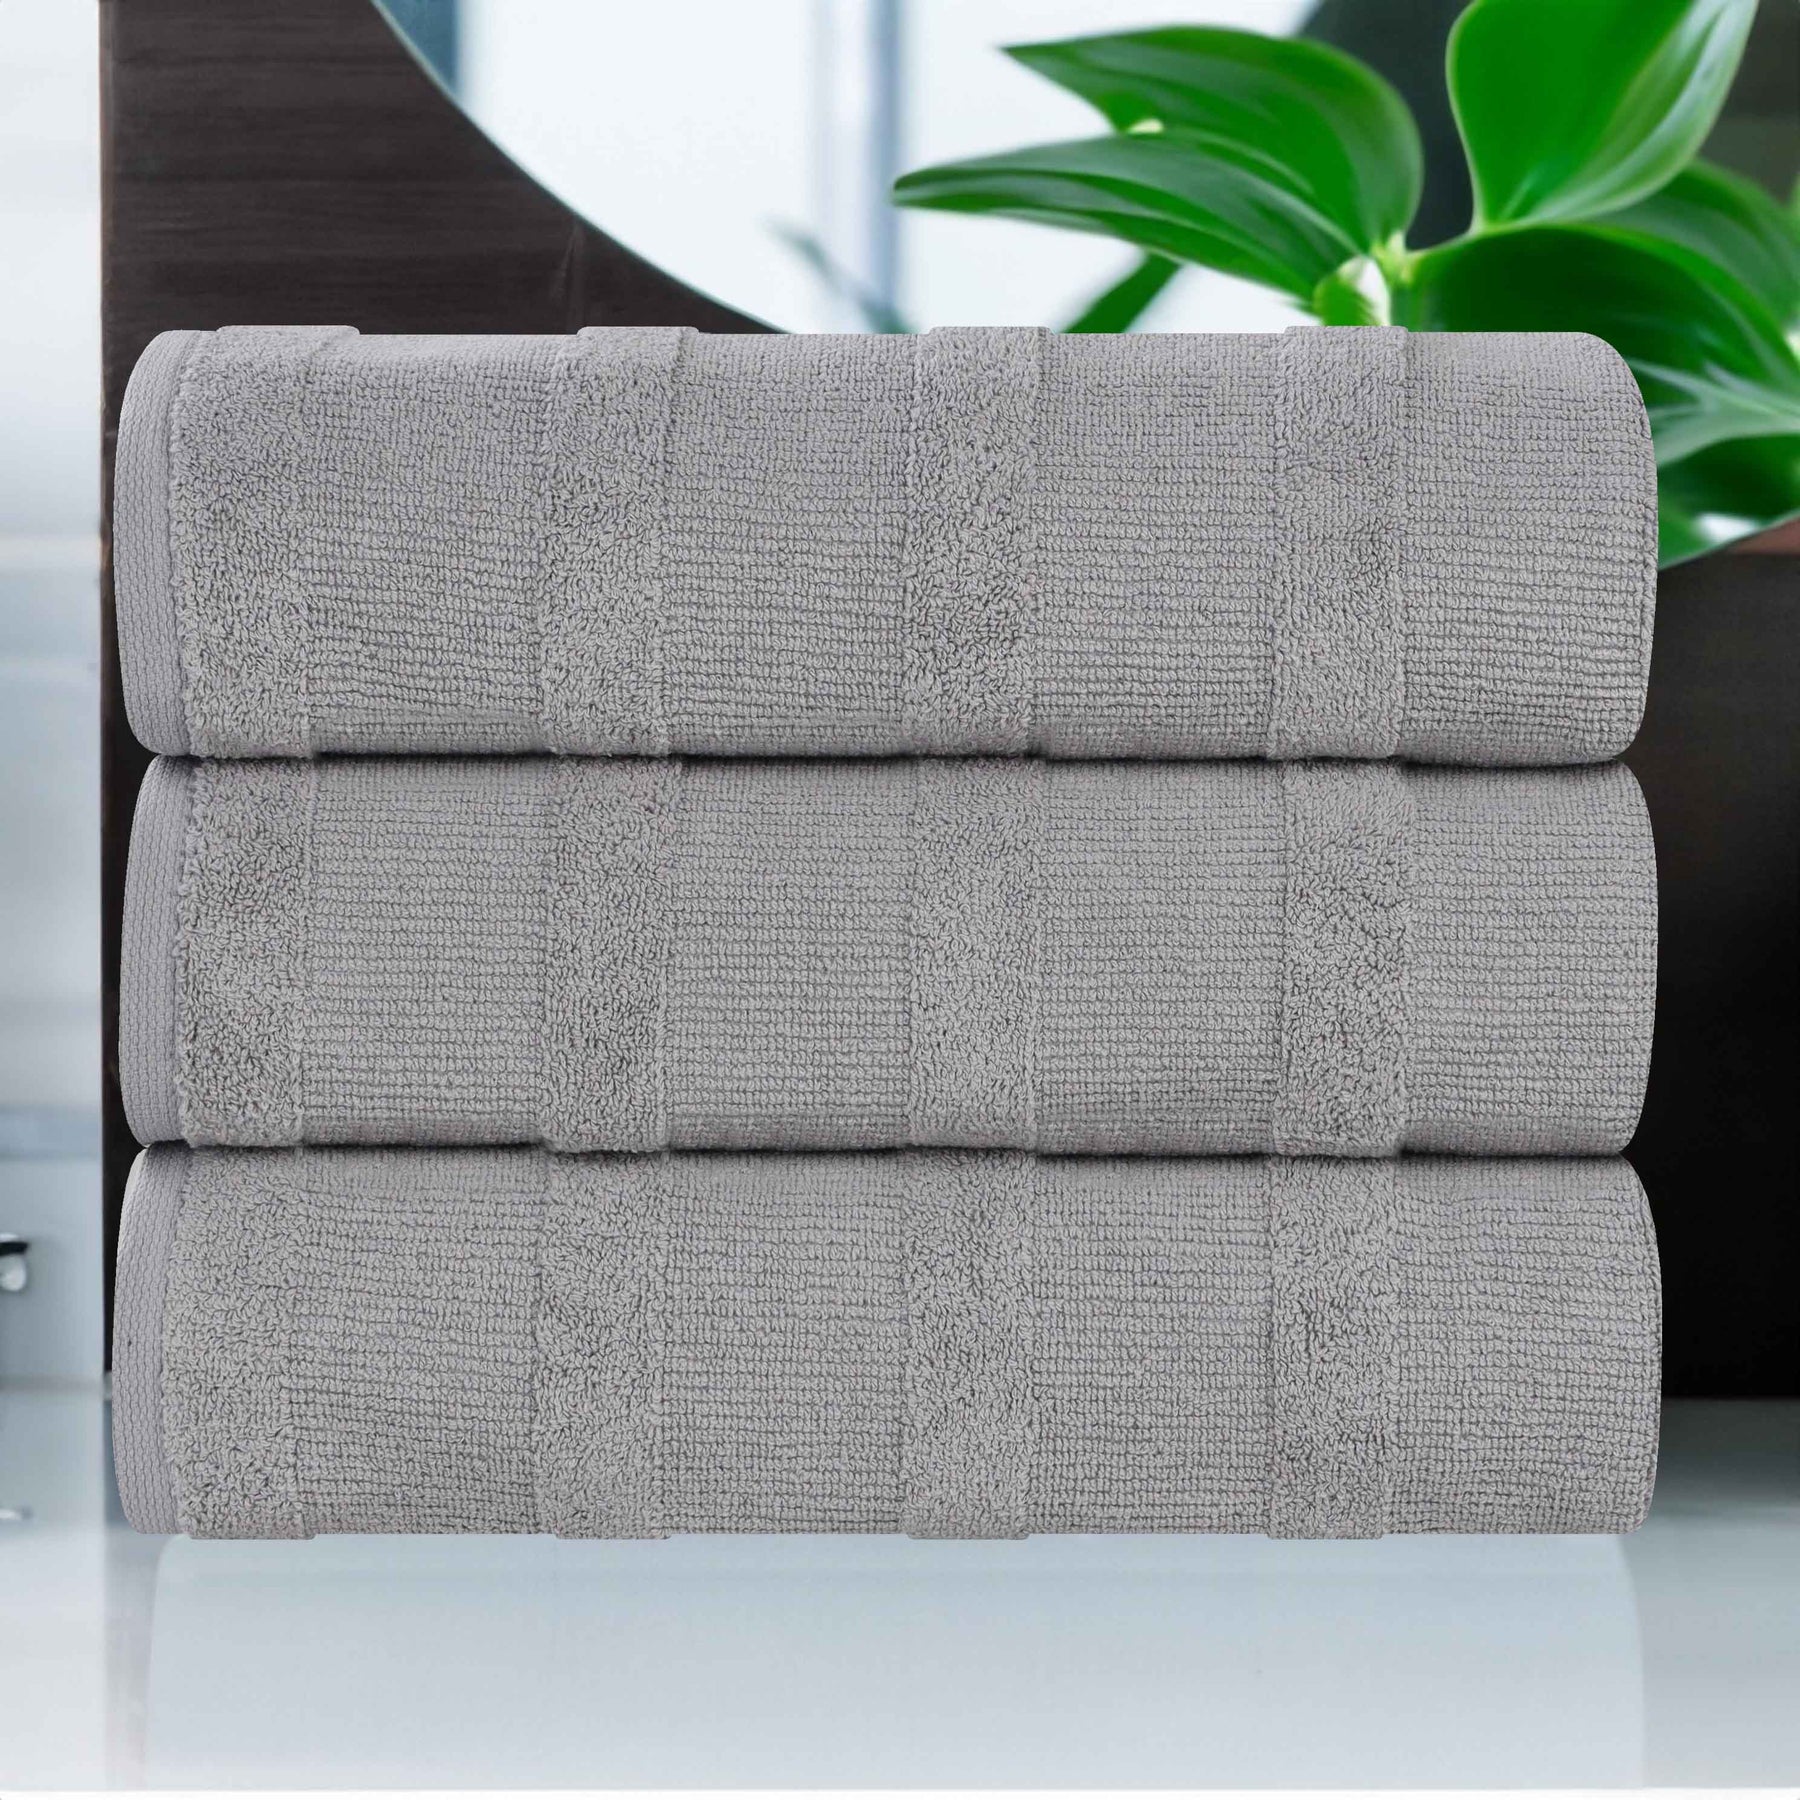 Roma Cotton Ribbed Textured Soft Highly Absorbent Bath Towel - Silver